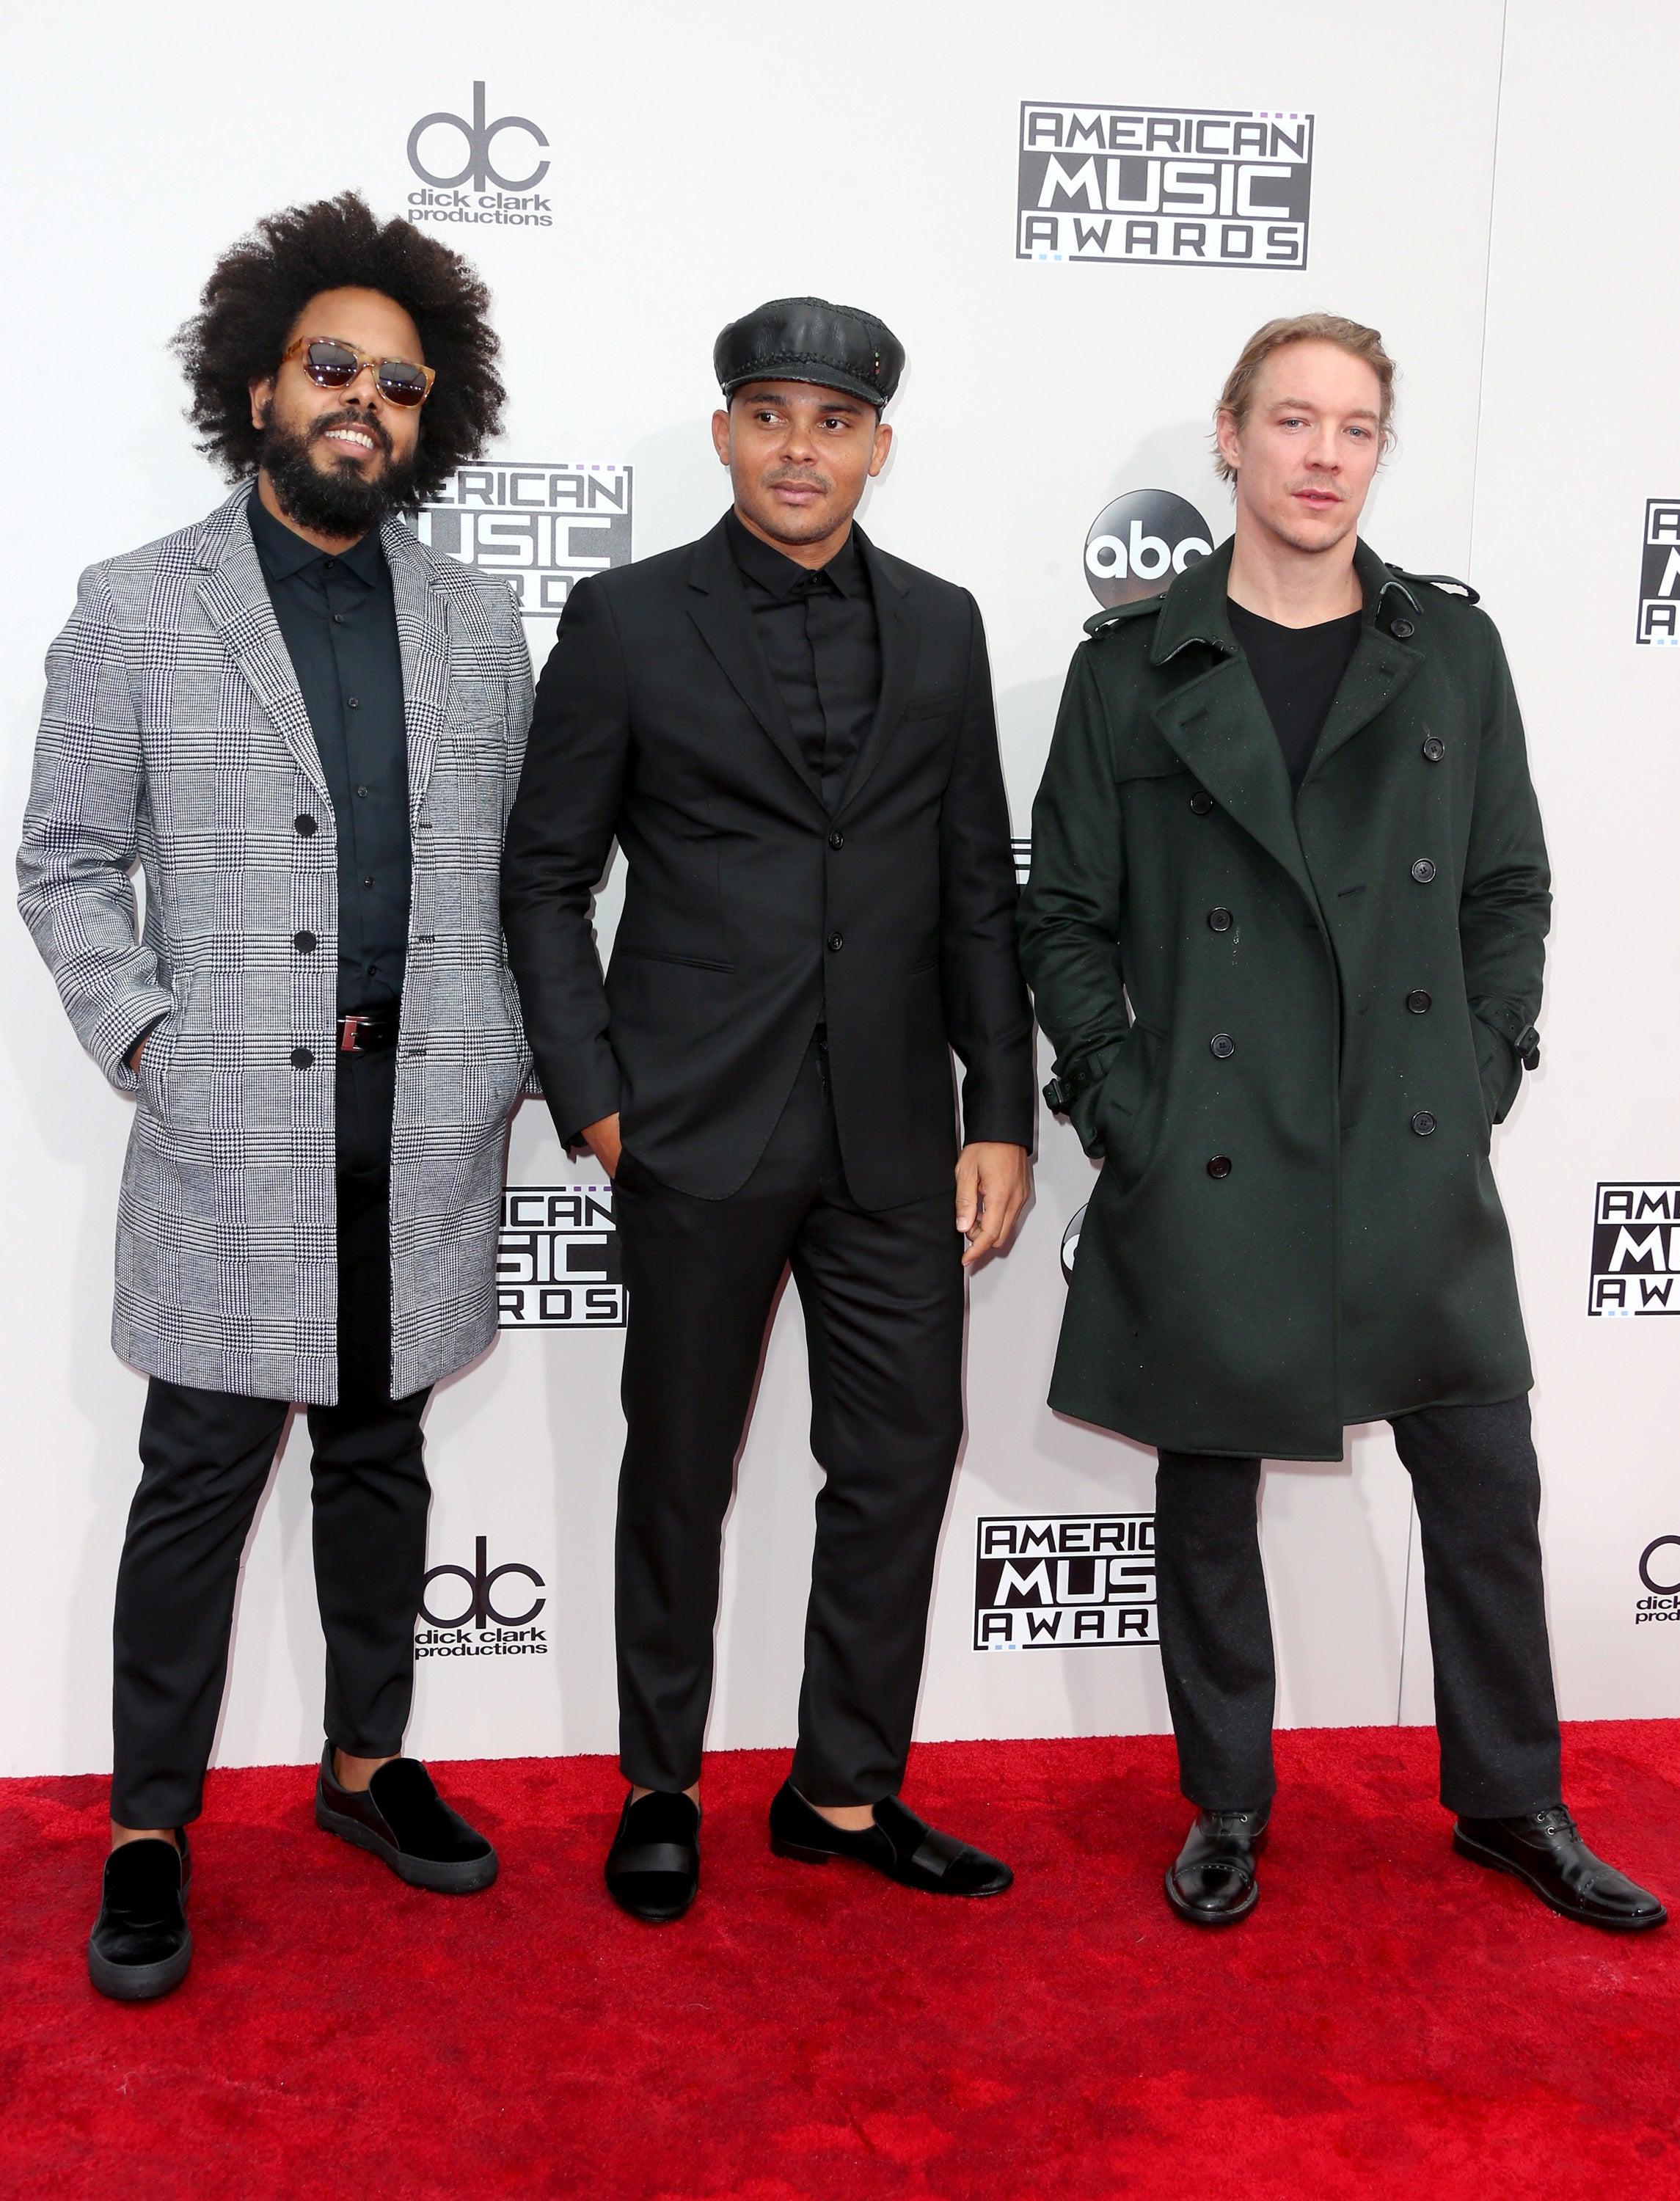 The 2016 American Music Awards Red Carpet Was On Fire!
